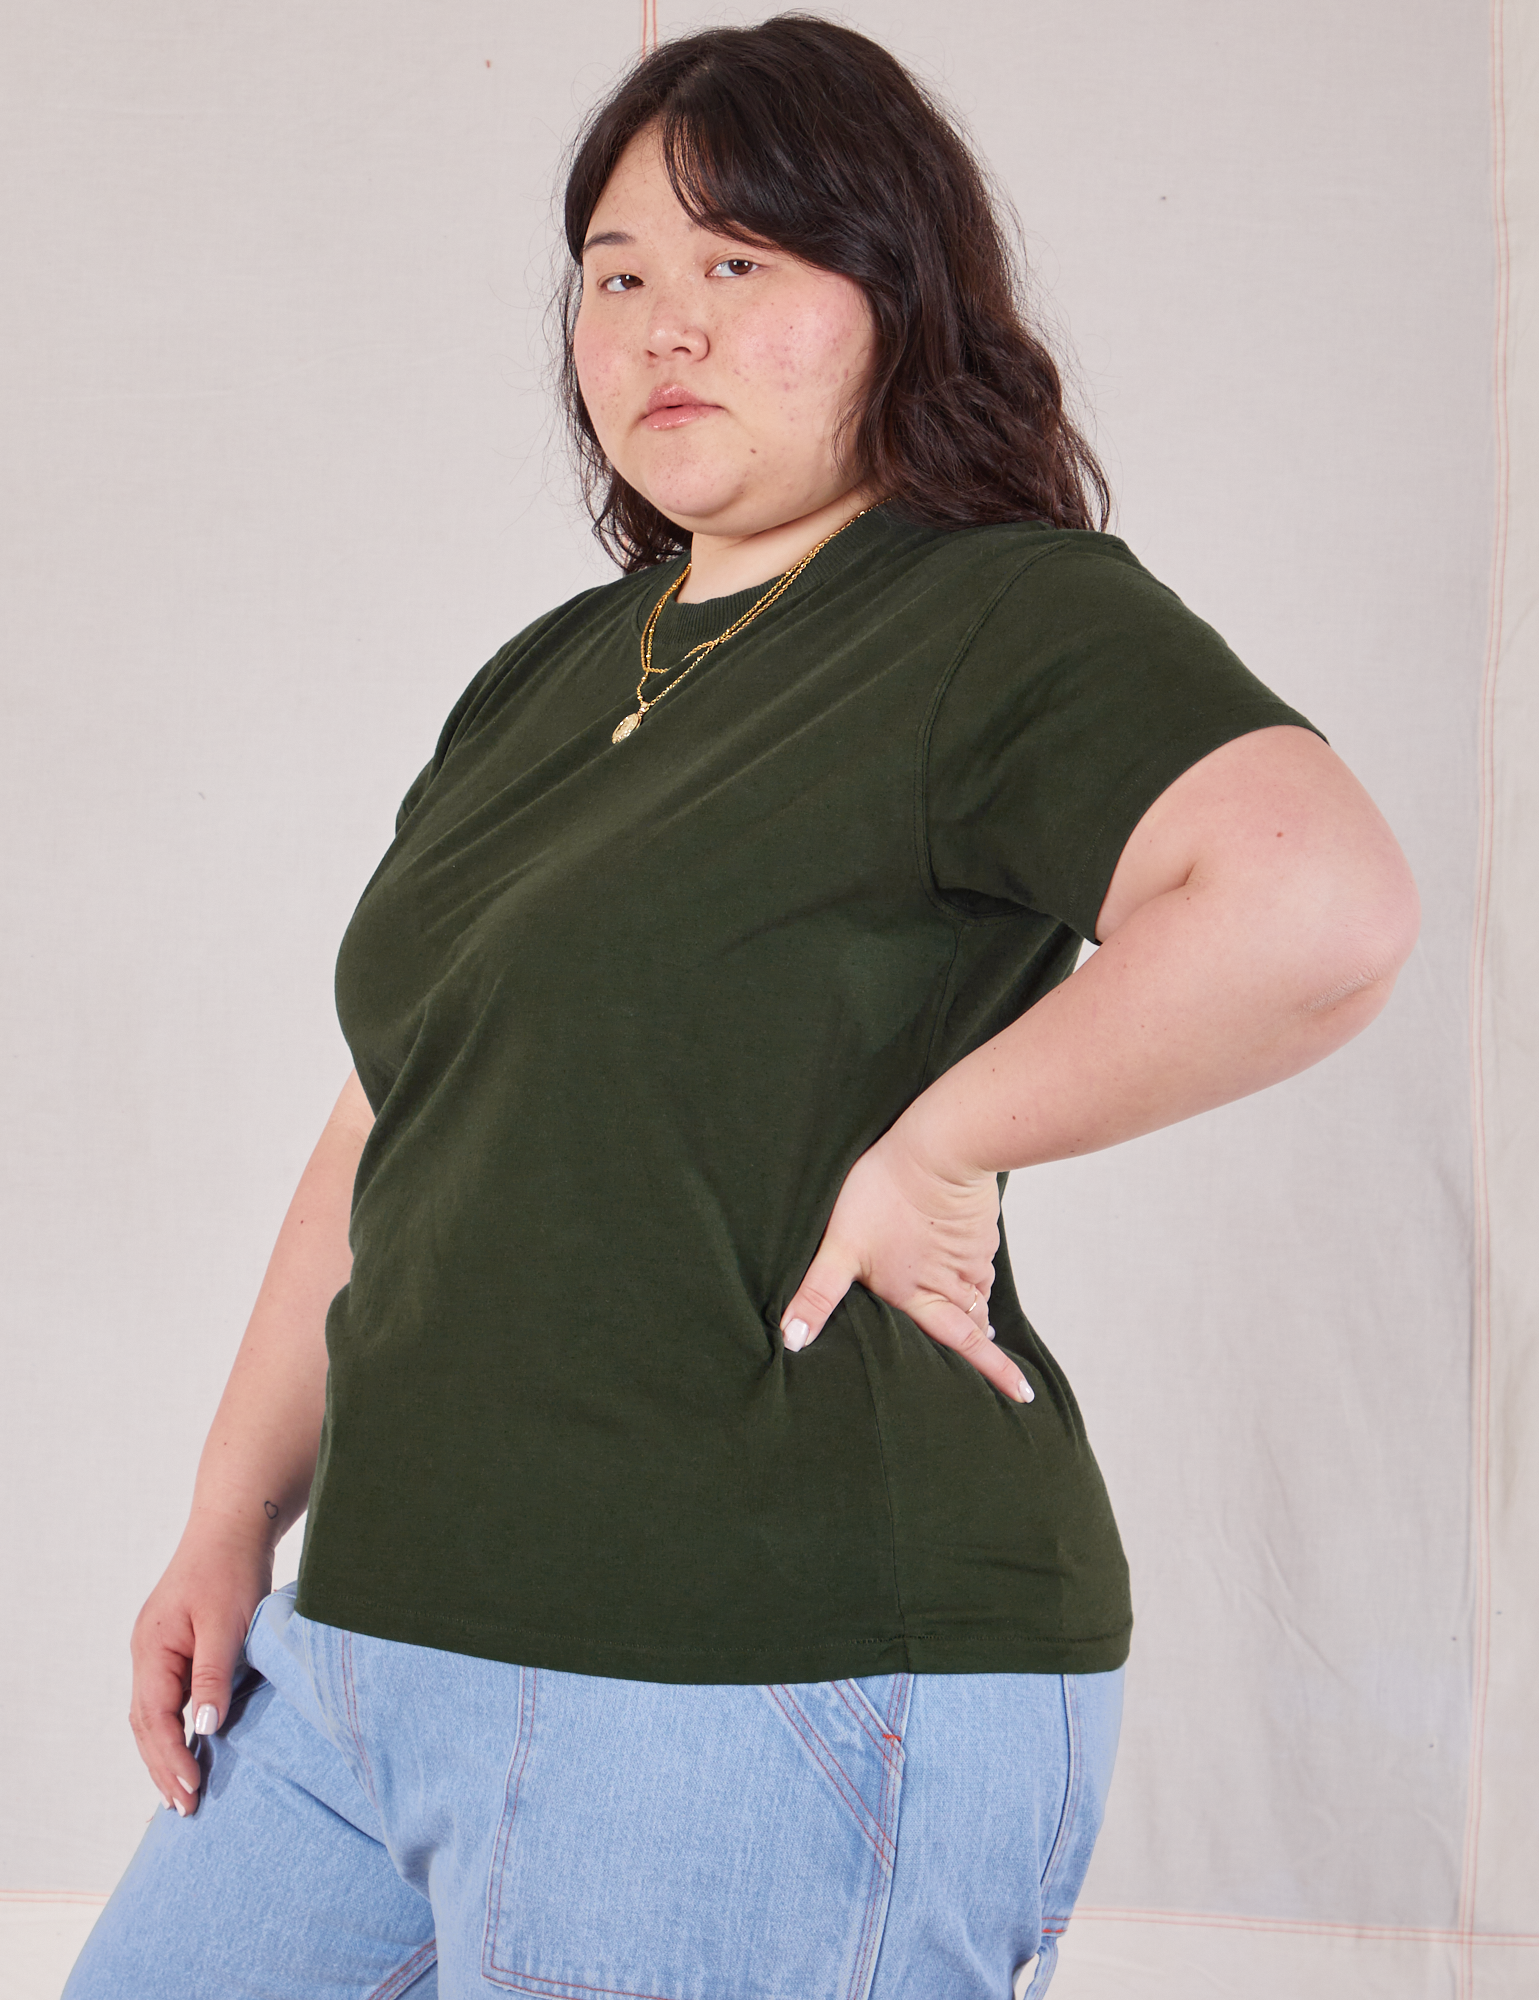 Organic Vintage Tee in Swamp Green angled front view on Ashley